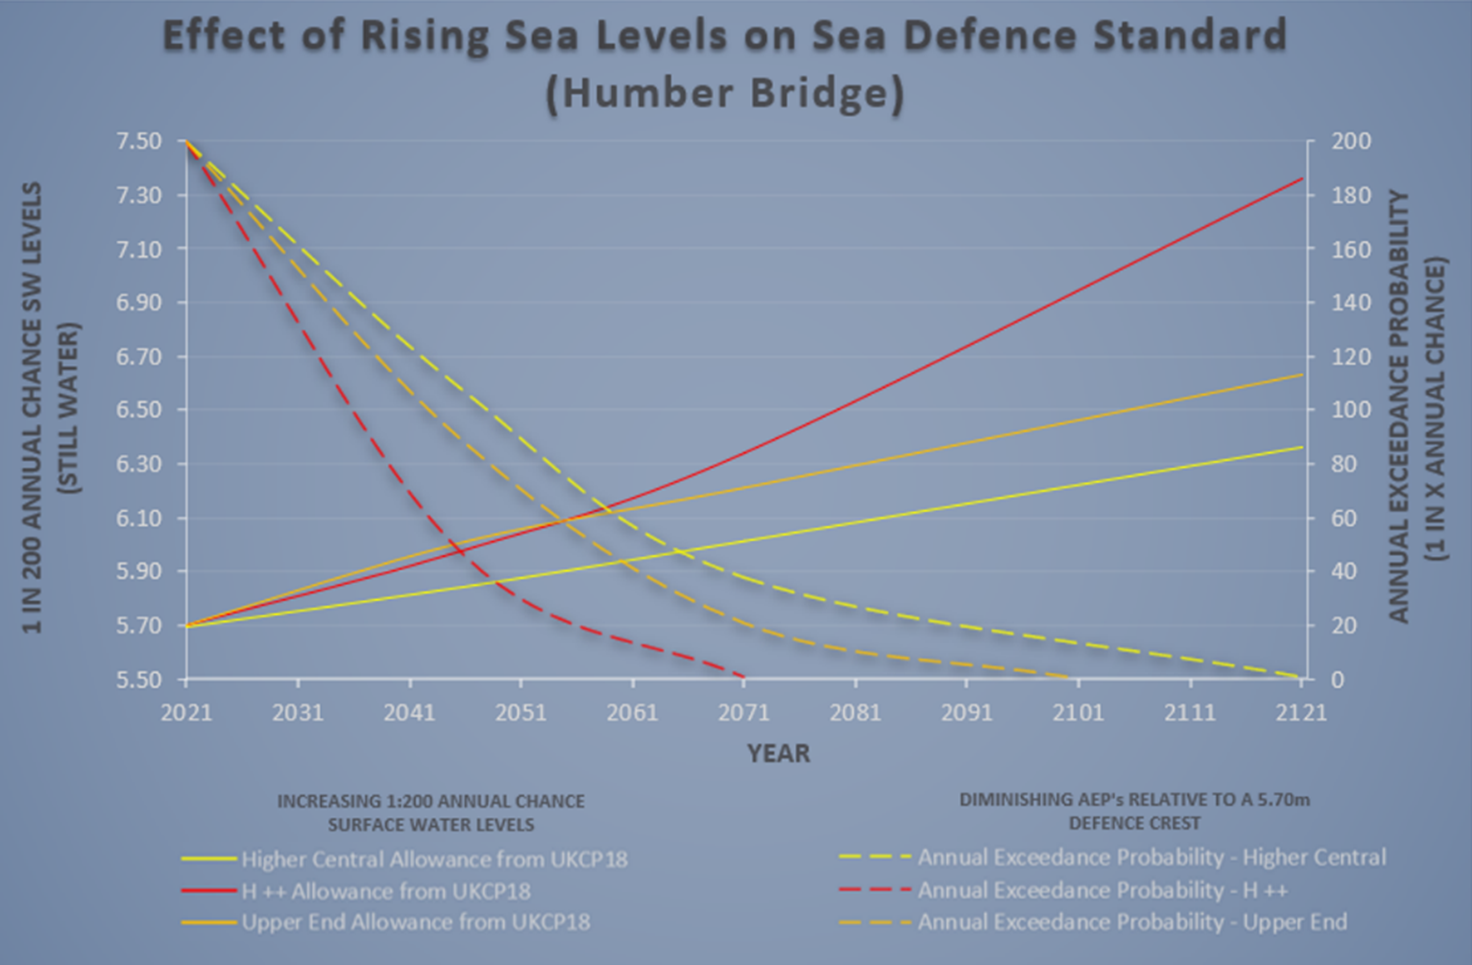 Graph showing Effect of Sea Level Rise on Sea Defence Standard